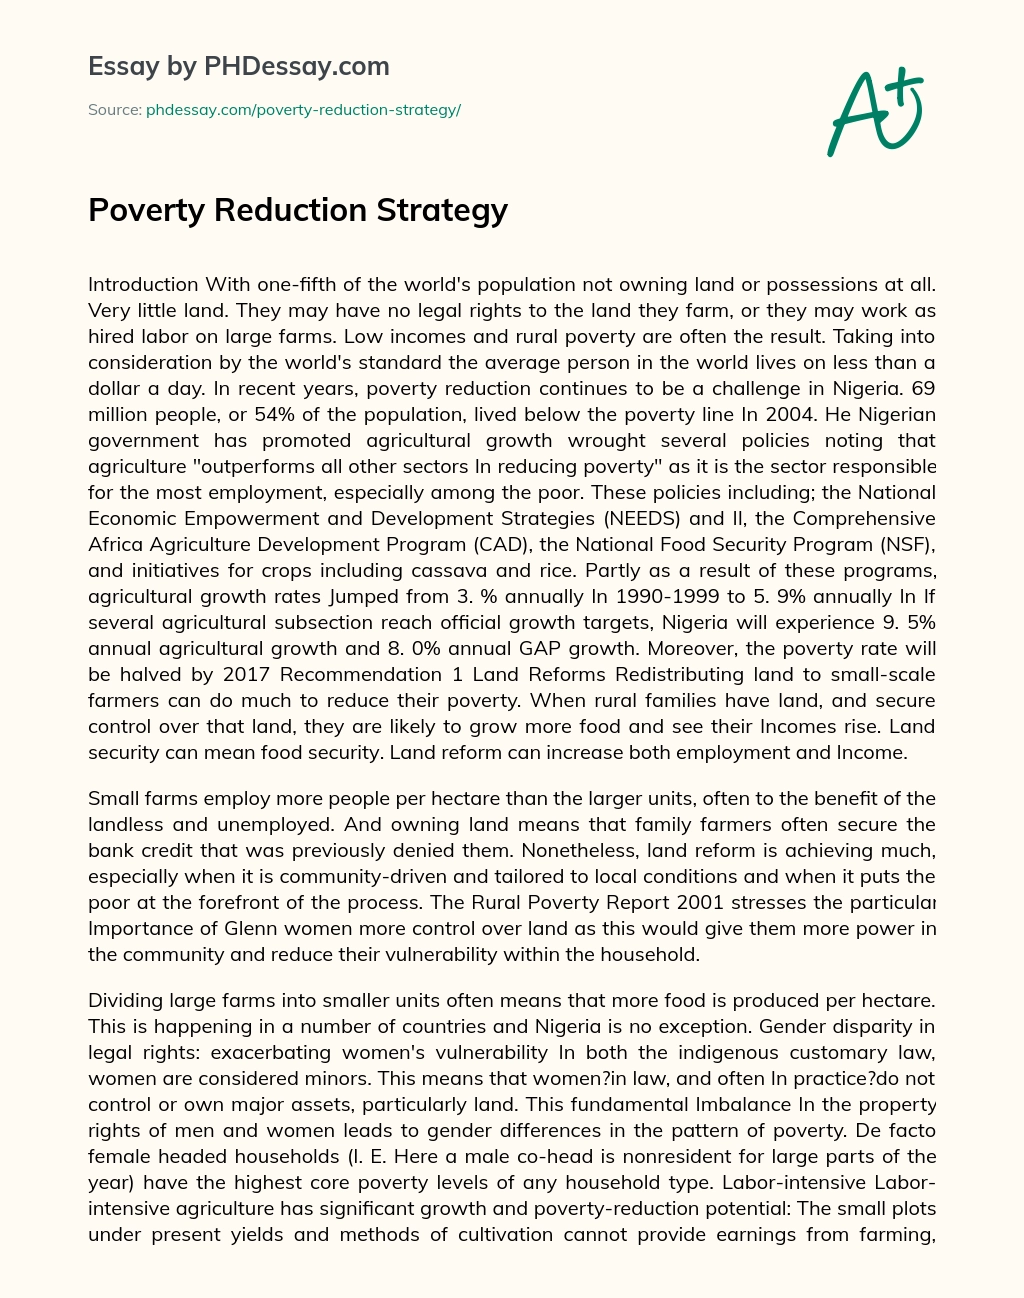 Poverty Reduction Strategy essay